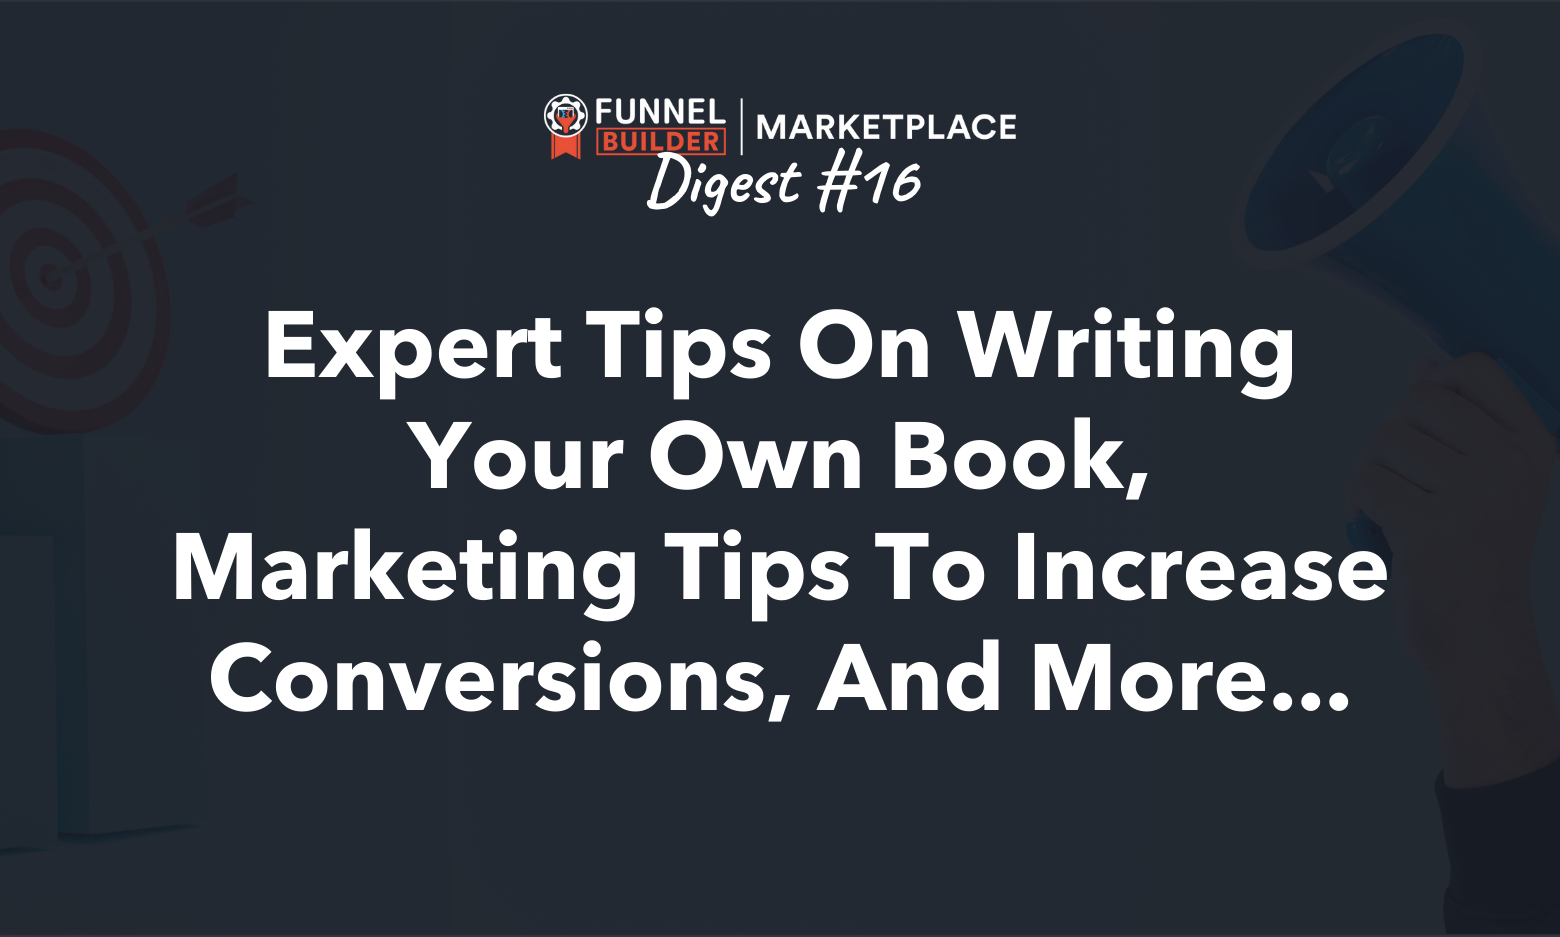 Rolodex Digest #16: Expert tips on writing your own book, marketing tips to increase conversions, and more...